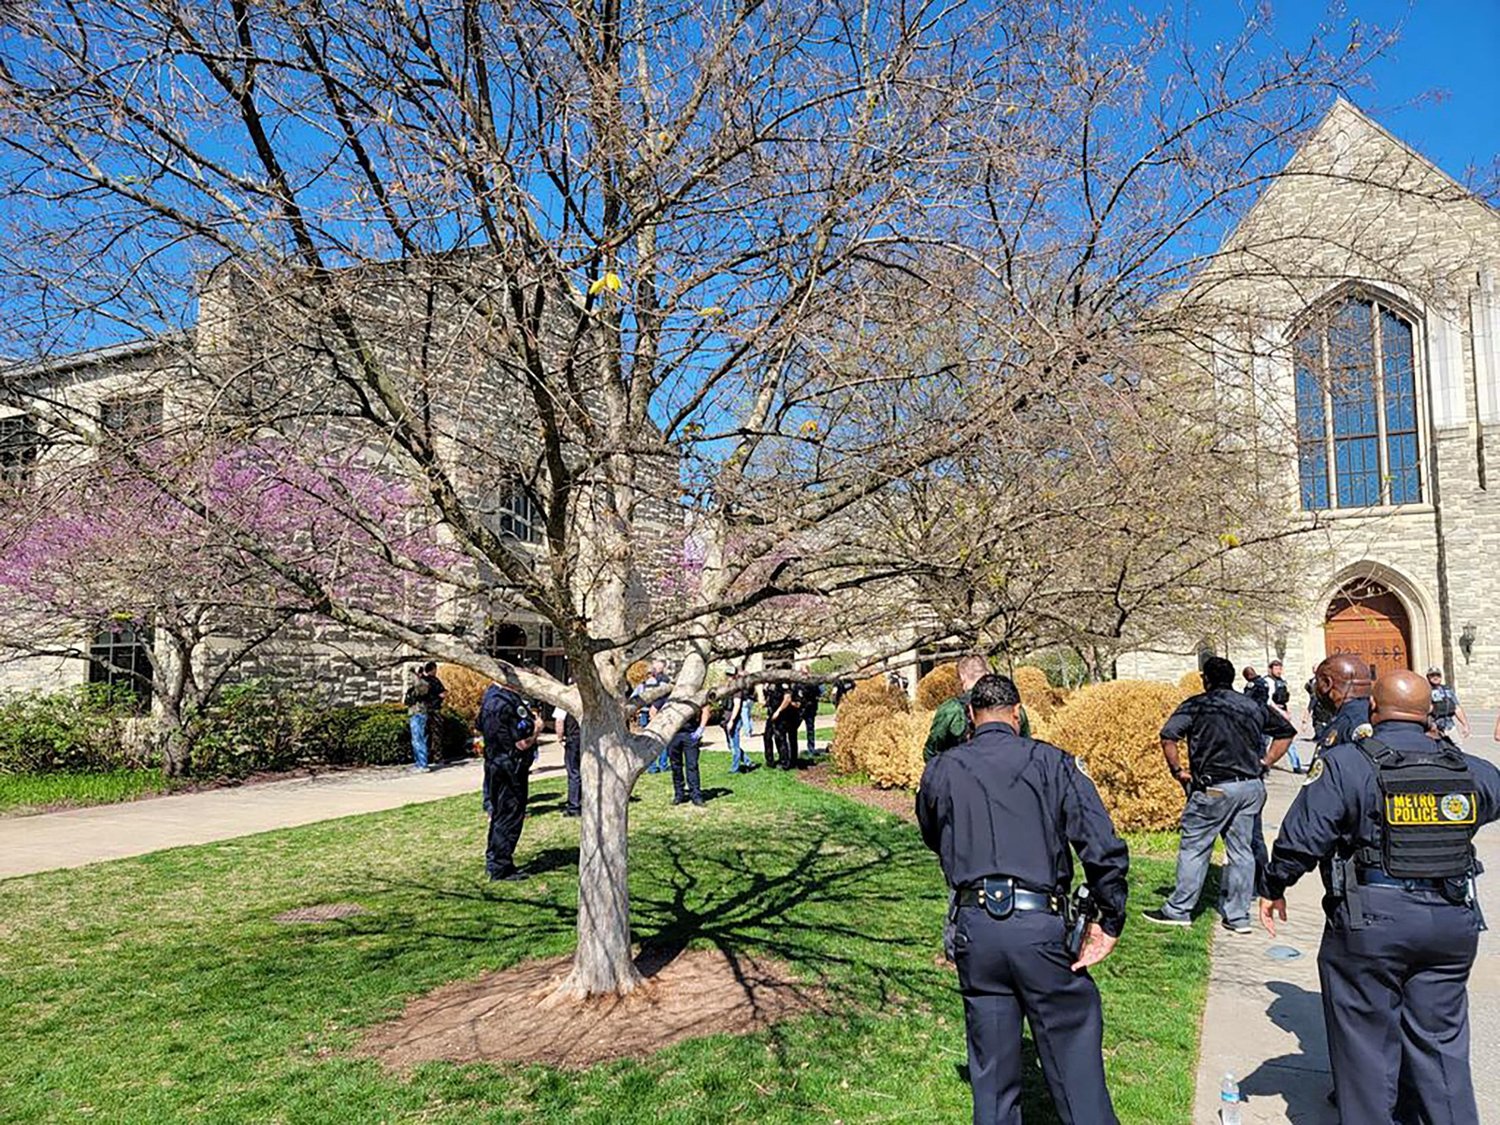 Police officers arrive at the Covenant School on the grounds of Covenant Presbyterian Church, after reports of a shooting in Nashville, Tenn., March 27, 2023. At least six staff members were killed, including three children, police reported.